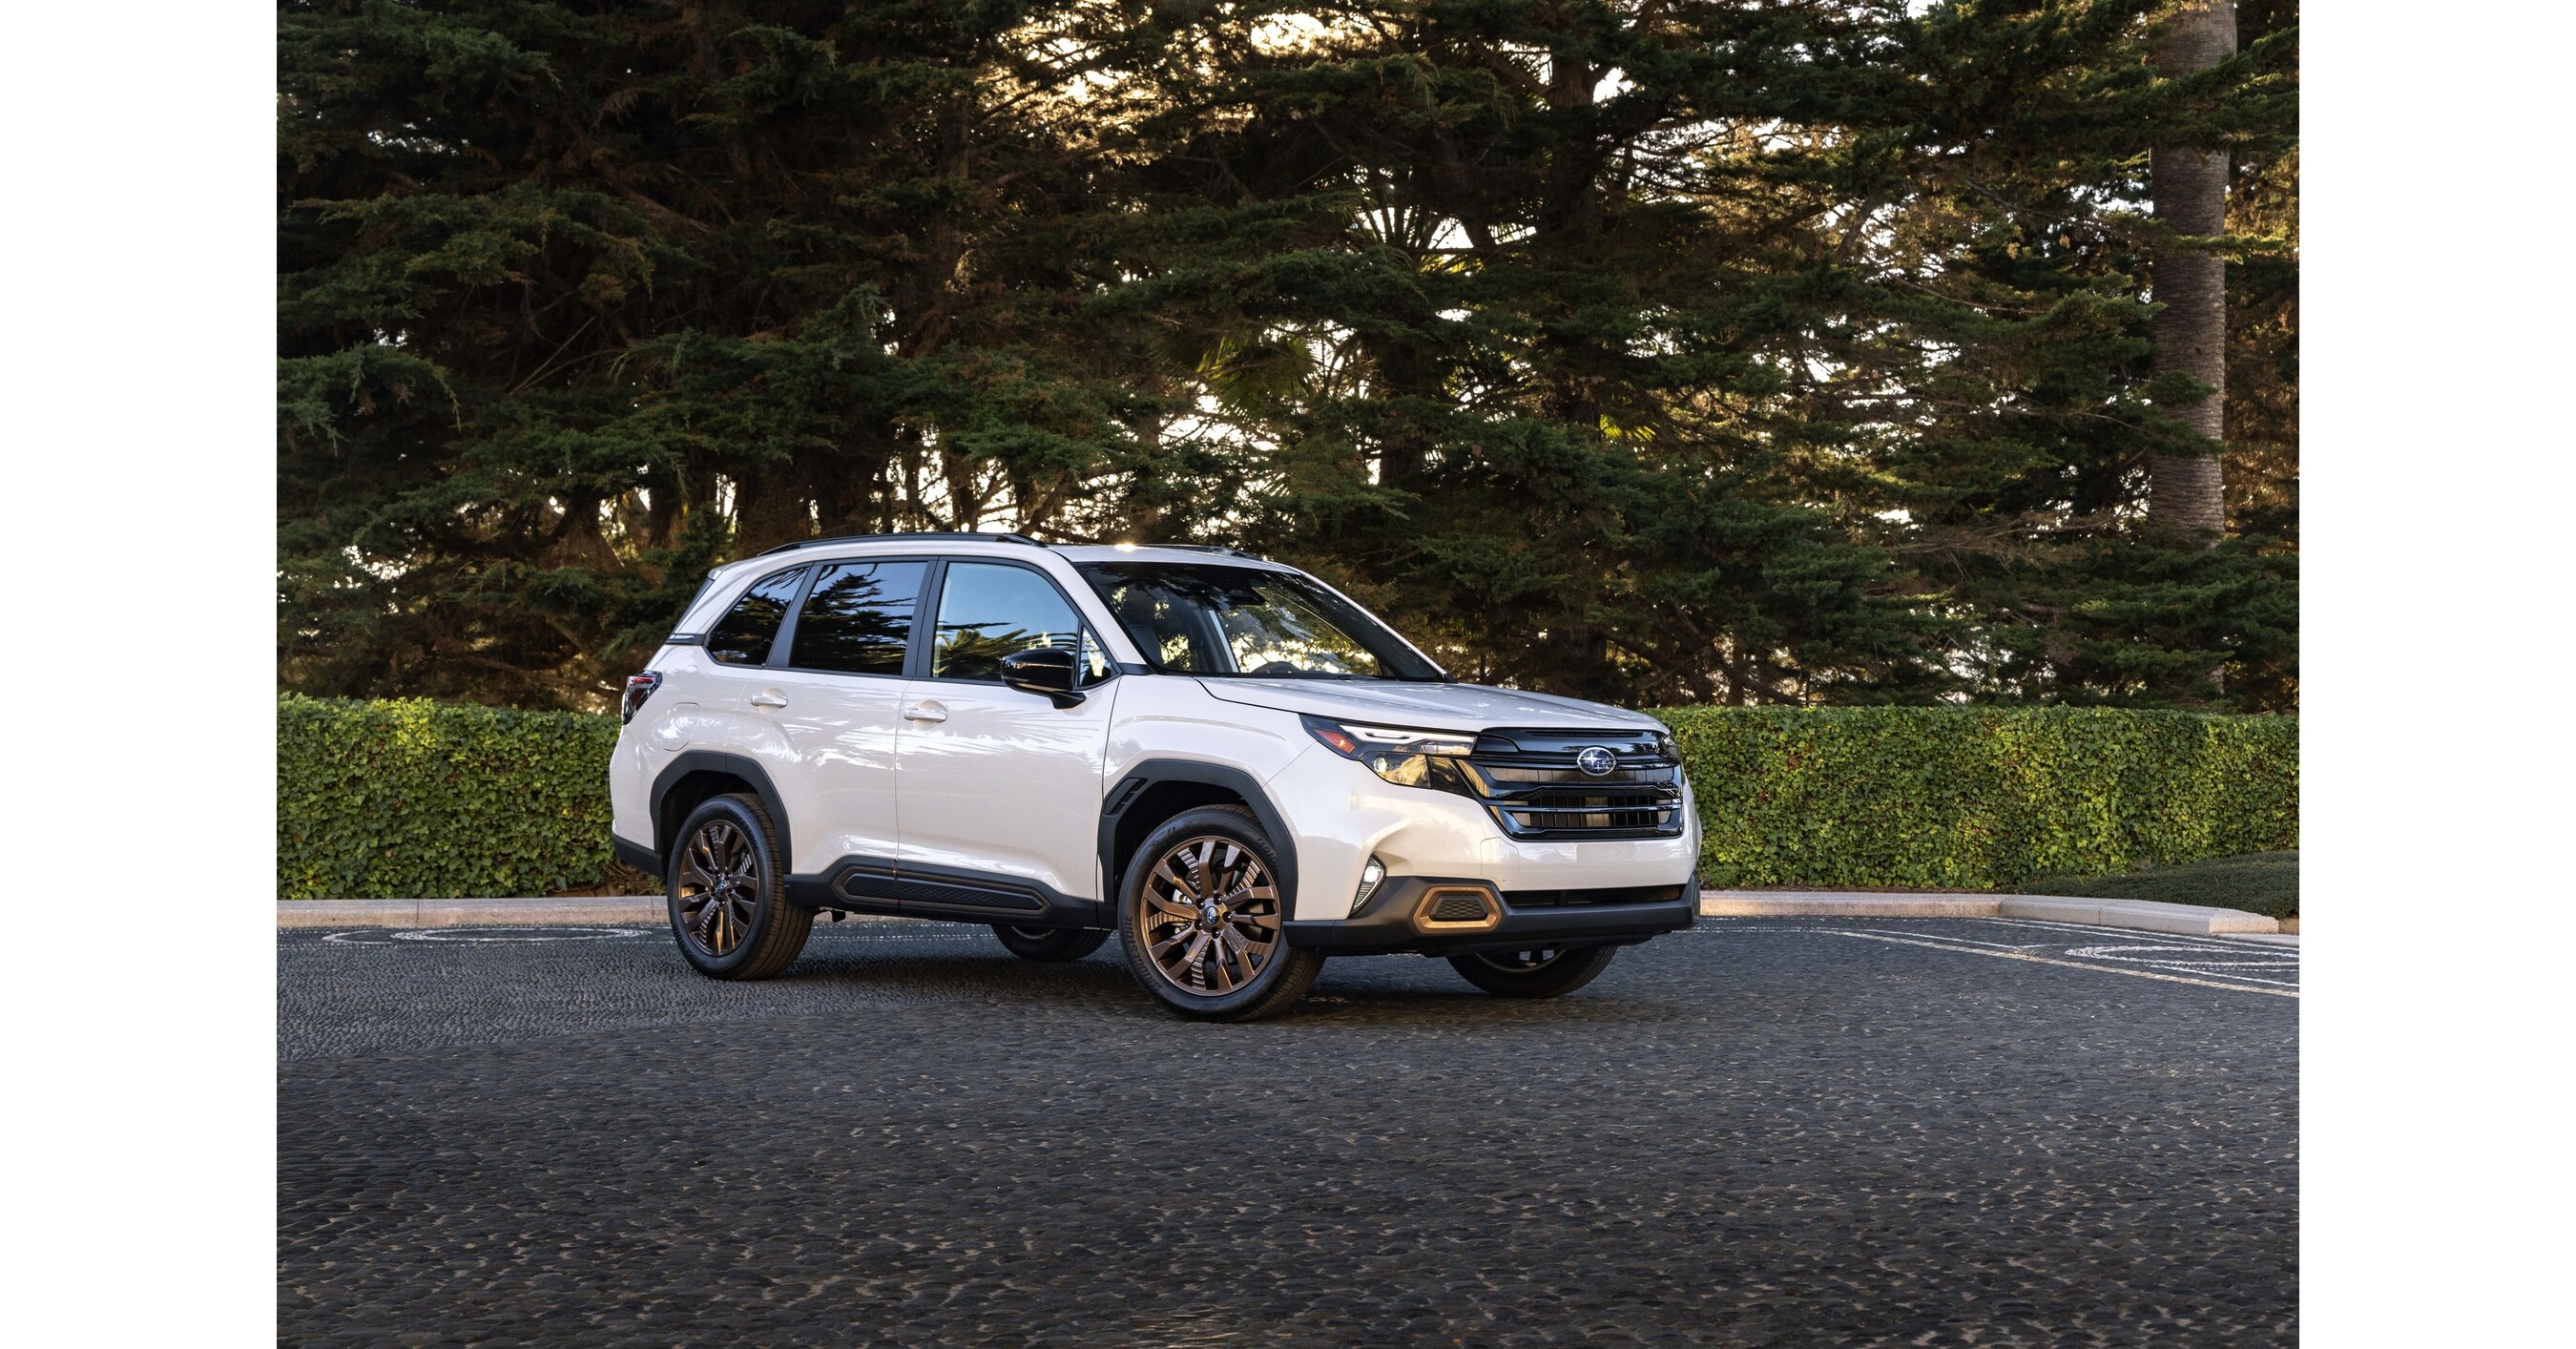 SUBARU DEBUTS ALL-NEW 2025 FORESTER SUV WITH NEW STYLING, SAFETY